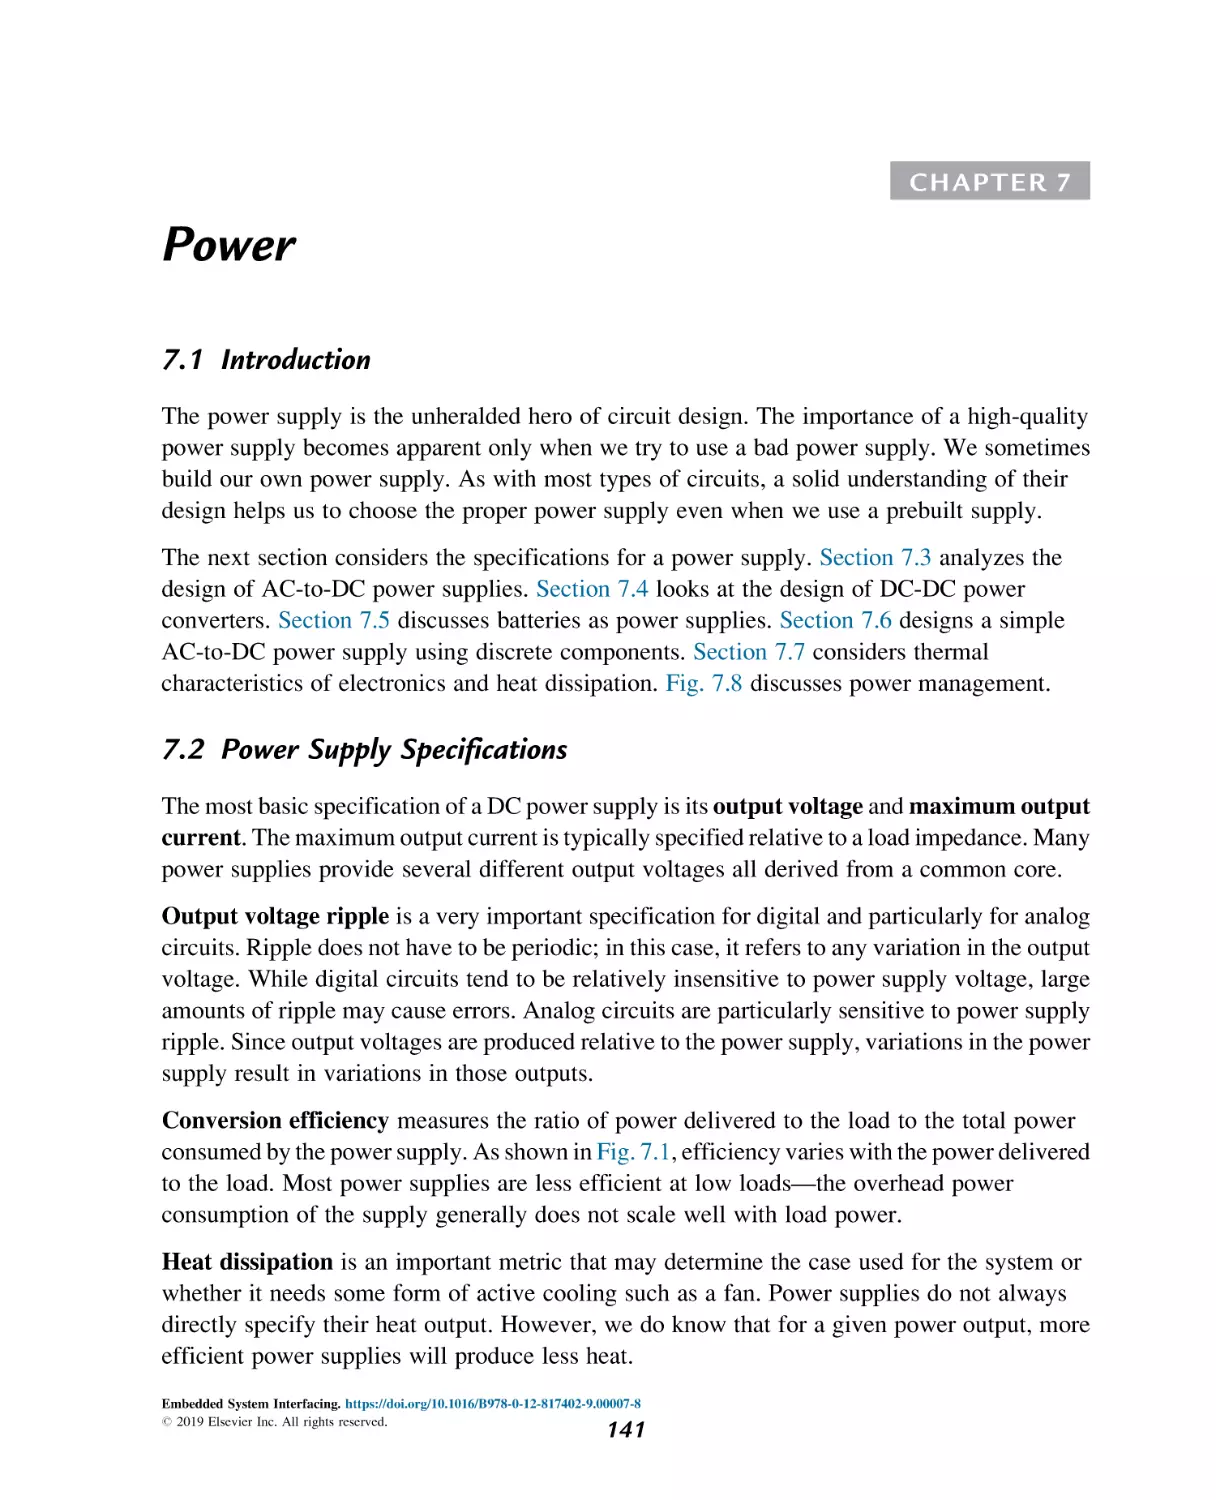 7
Power
Introduction
Power Supply Specifications